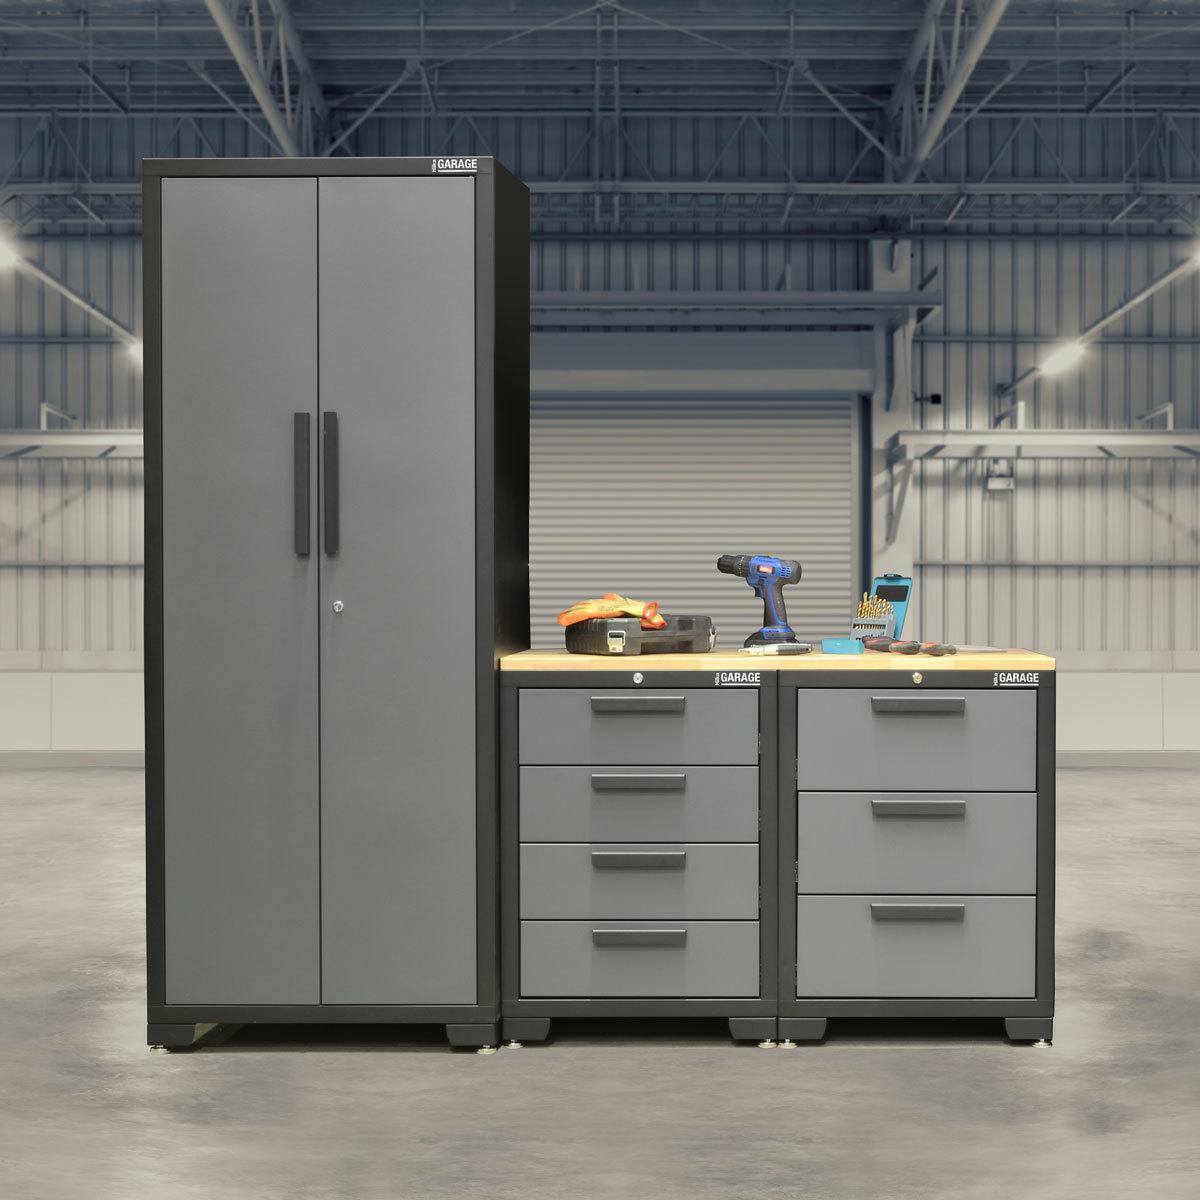 Front facing lifestyle image of unit in warehouse setting